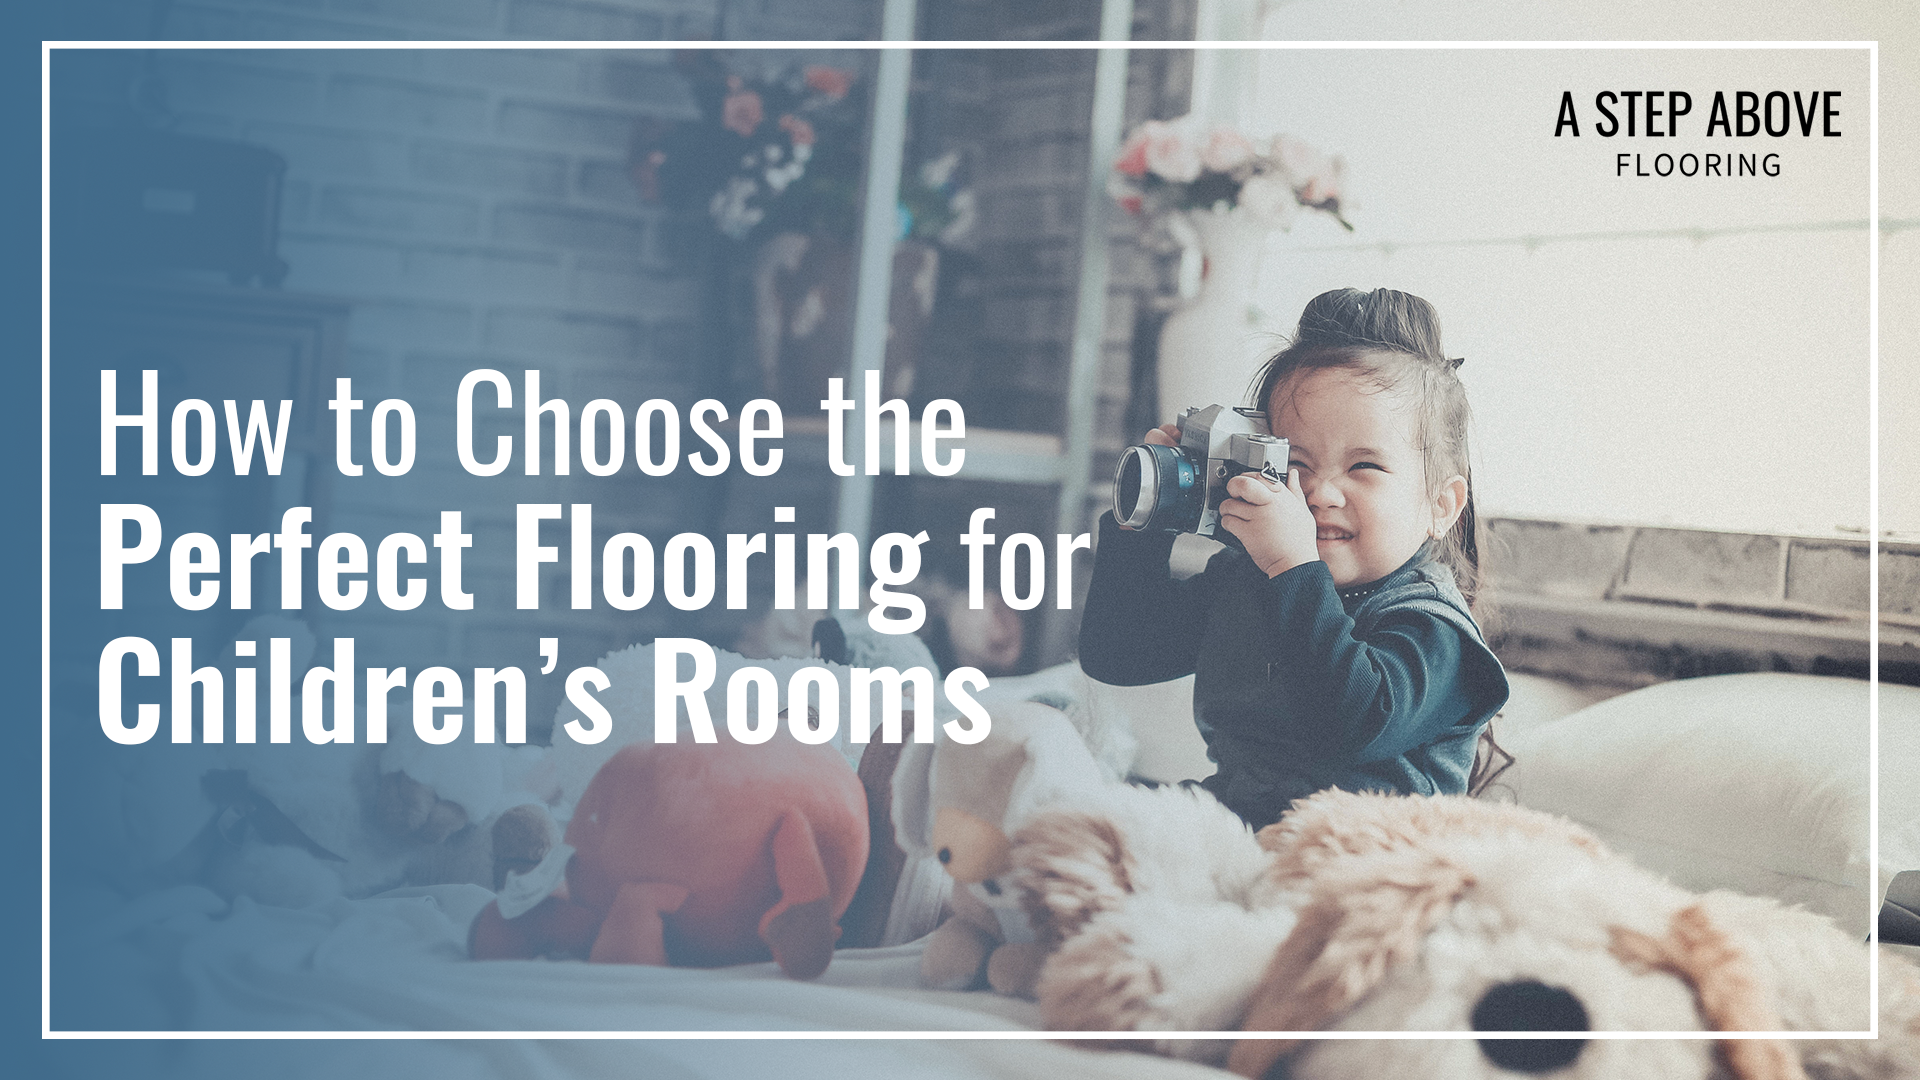 A child playing with a camera. The text reads, "How to Choose the Perfect Flooring for Children’s Rooms"